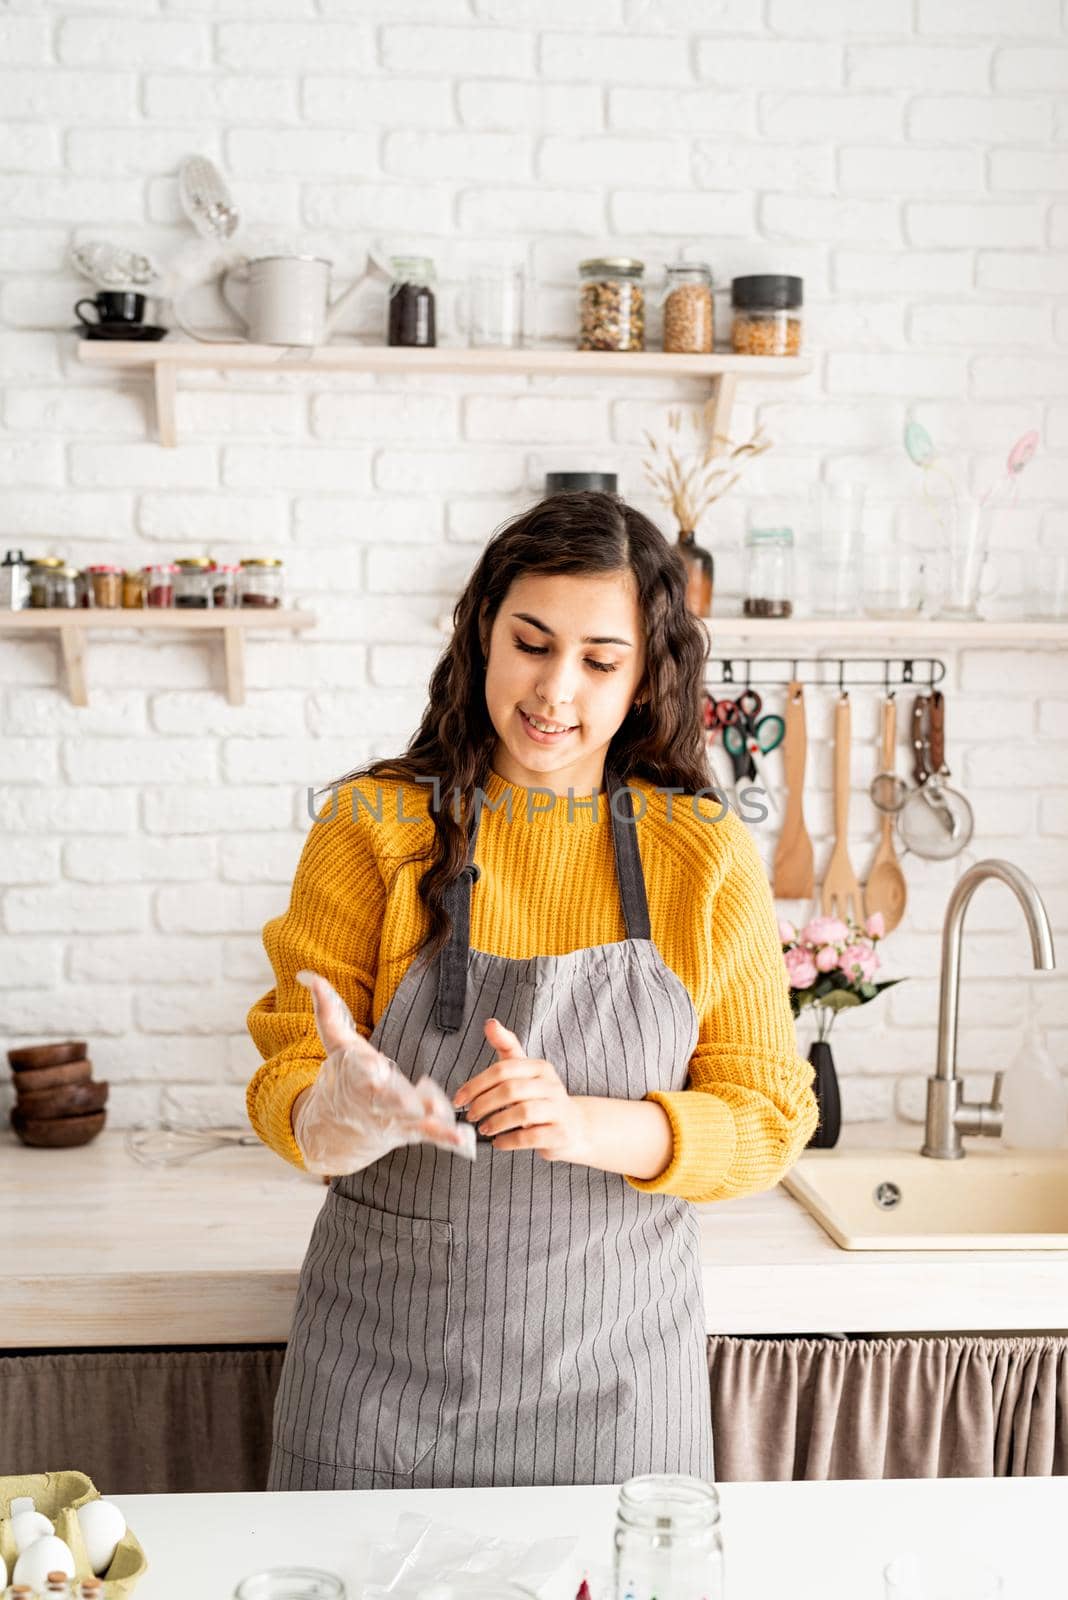 Beautiful brunette woman in yellow sweater and gray apron preparing to color easter eggs in the kitchen putting on the gloves